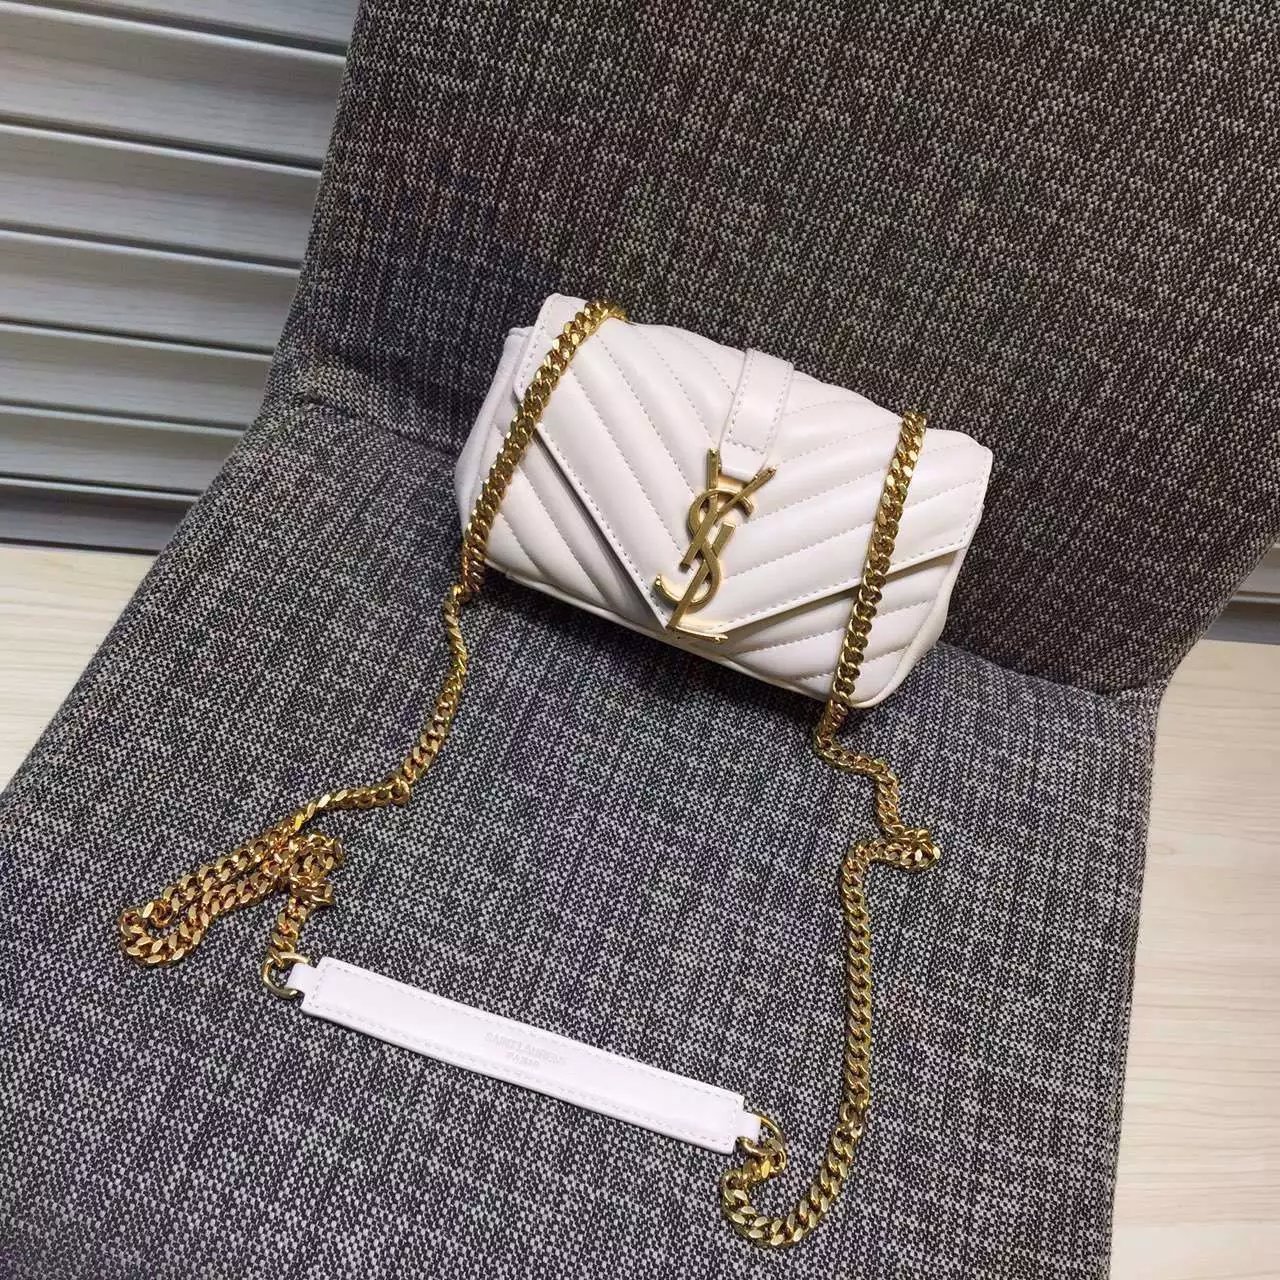 2016 Cheap YSL Outsale with Free Shipping-Saint Laurent Classic Baby Monogram Satchel in White Matelasse Leather with Gold Hardware